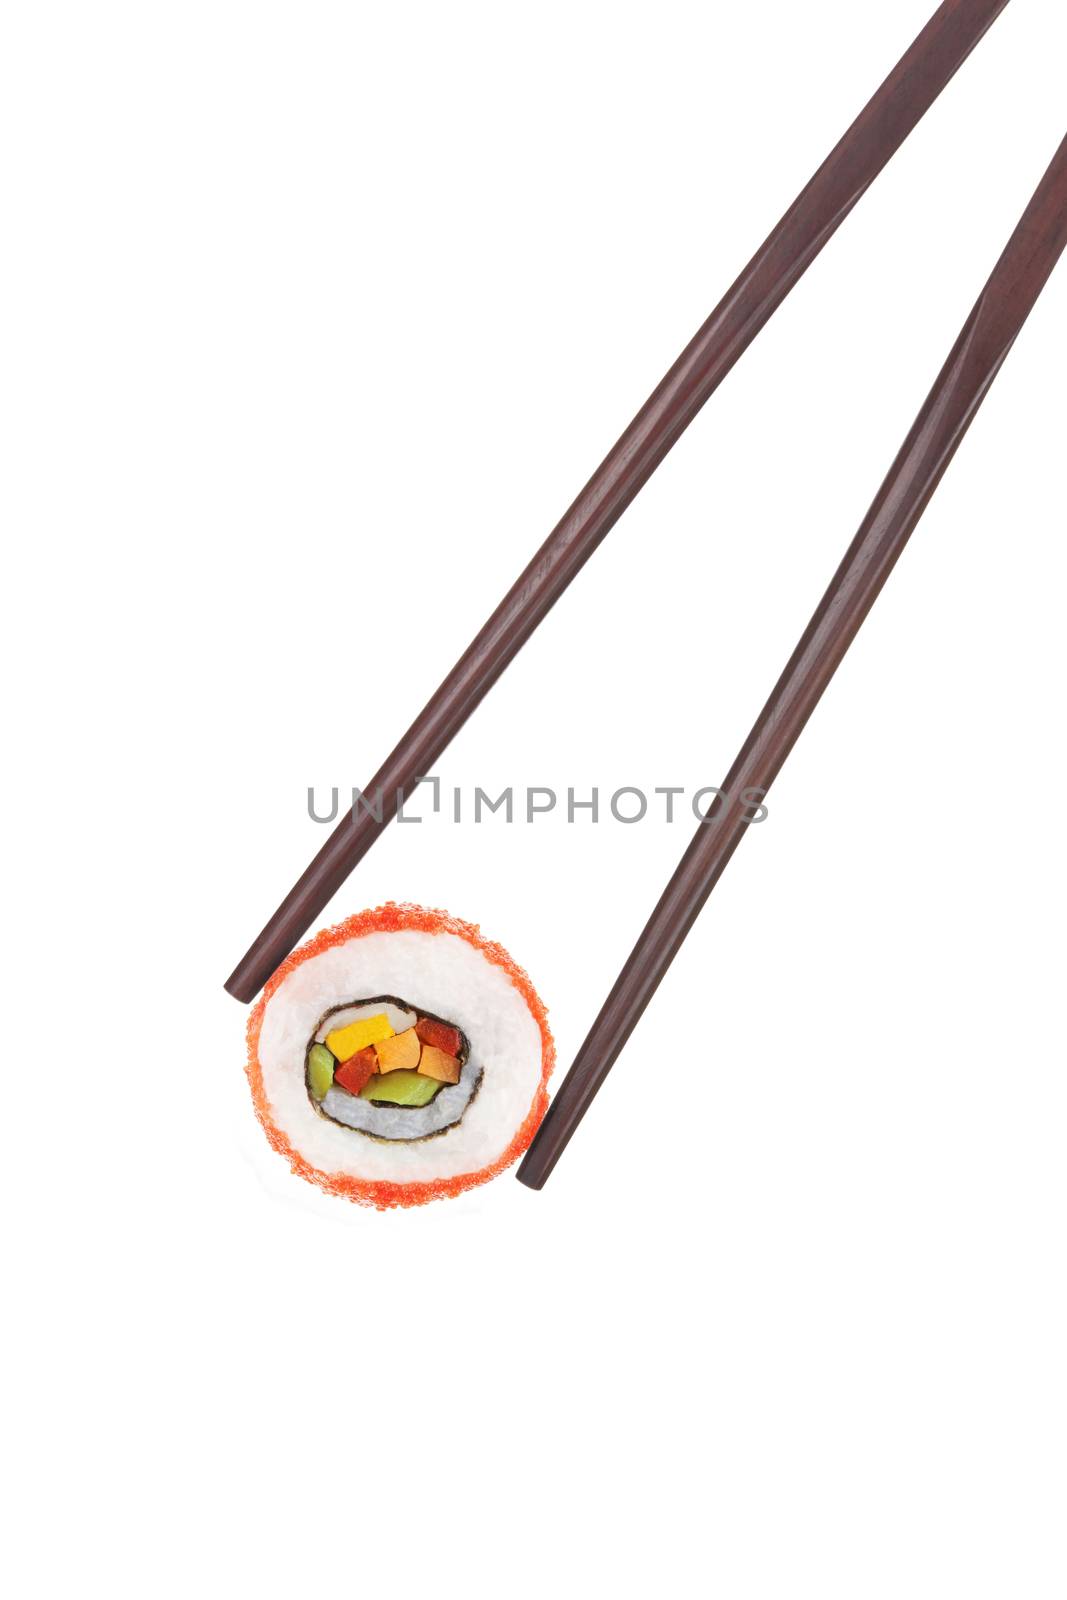 Holding a california maki sushi piece with chopsticks isolated on white background. Culinary gourmet japanese food. 